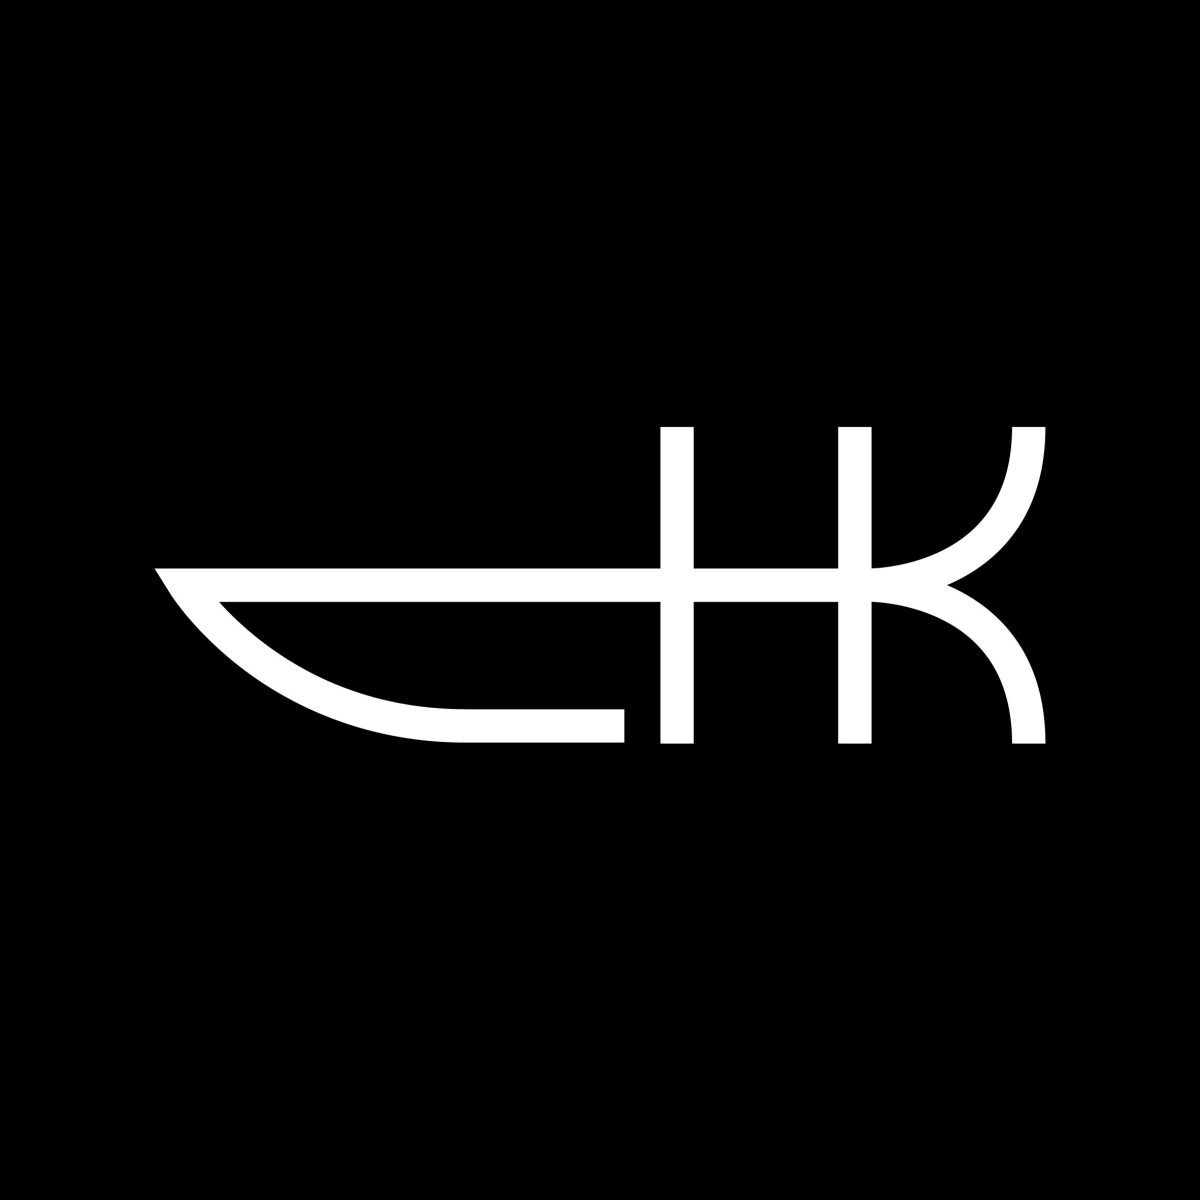 Harbour Kitchen logo and identity